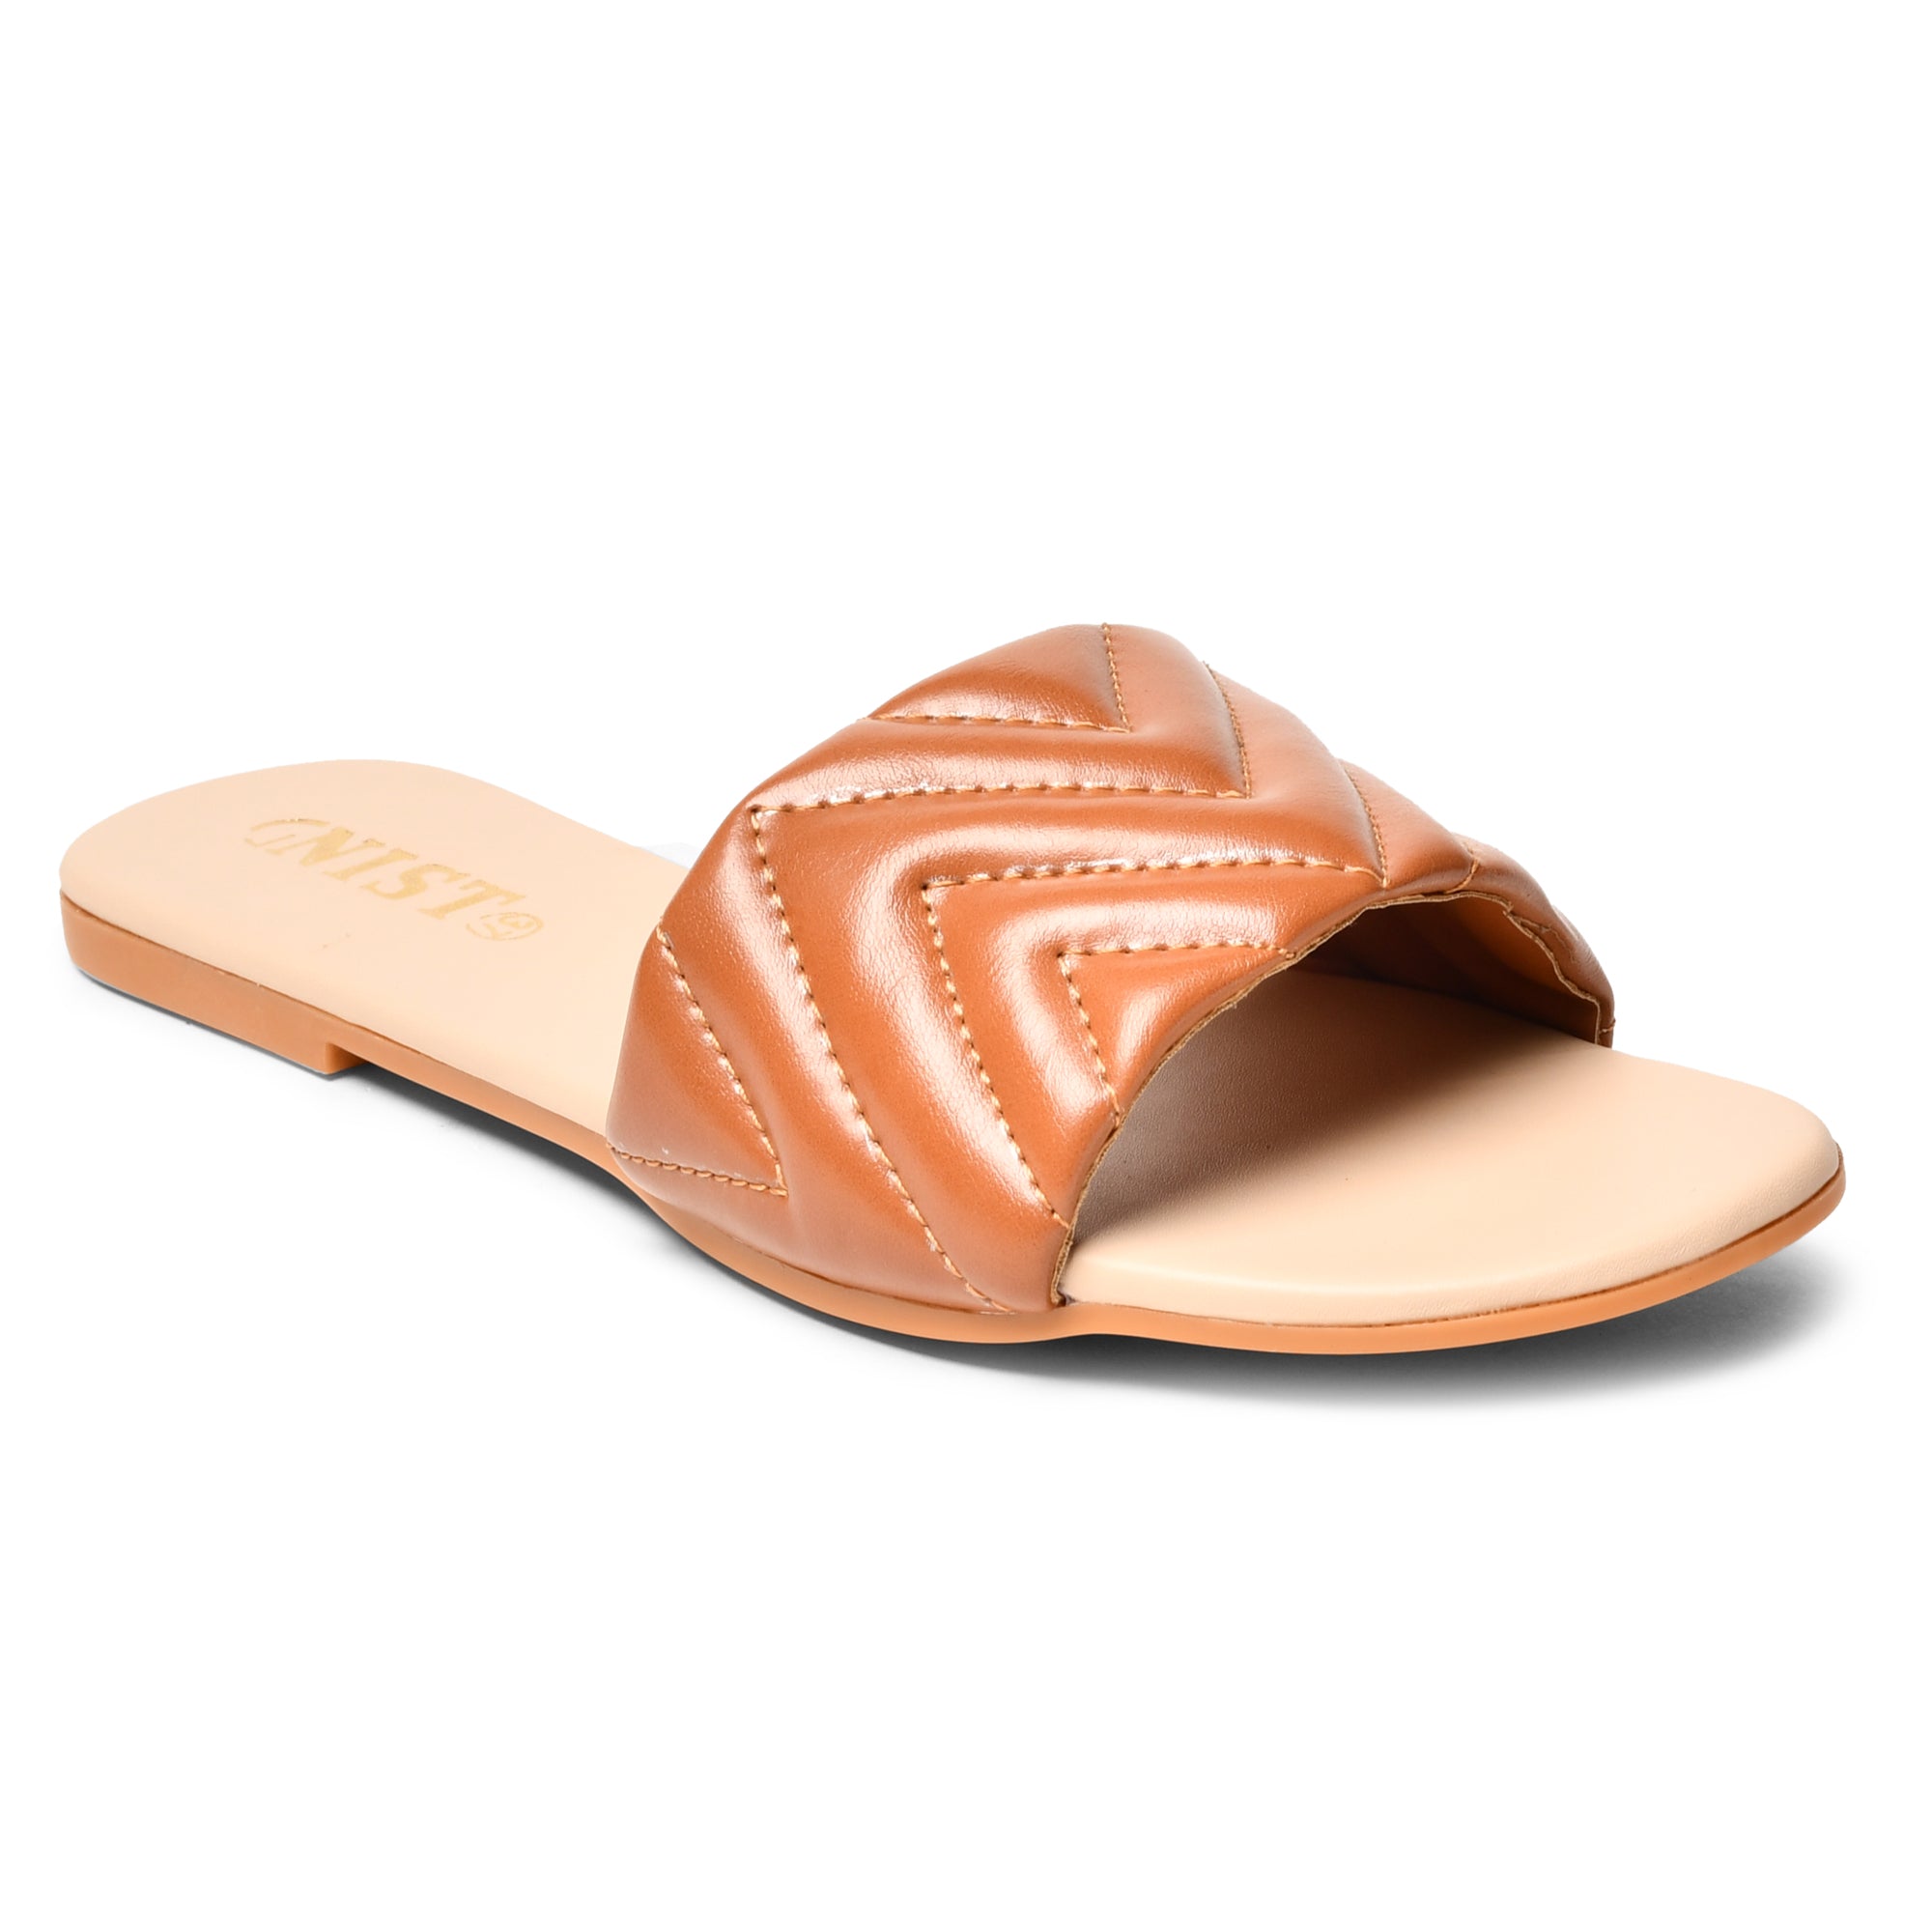 GNIST GG Quilted Faux Leather Tan Sandal